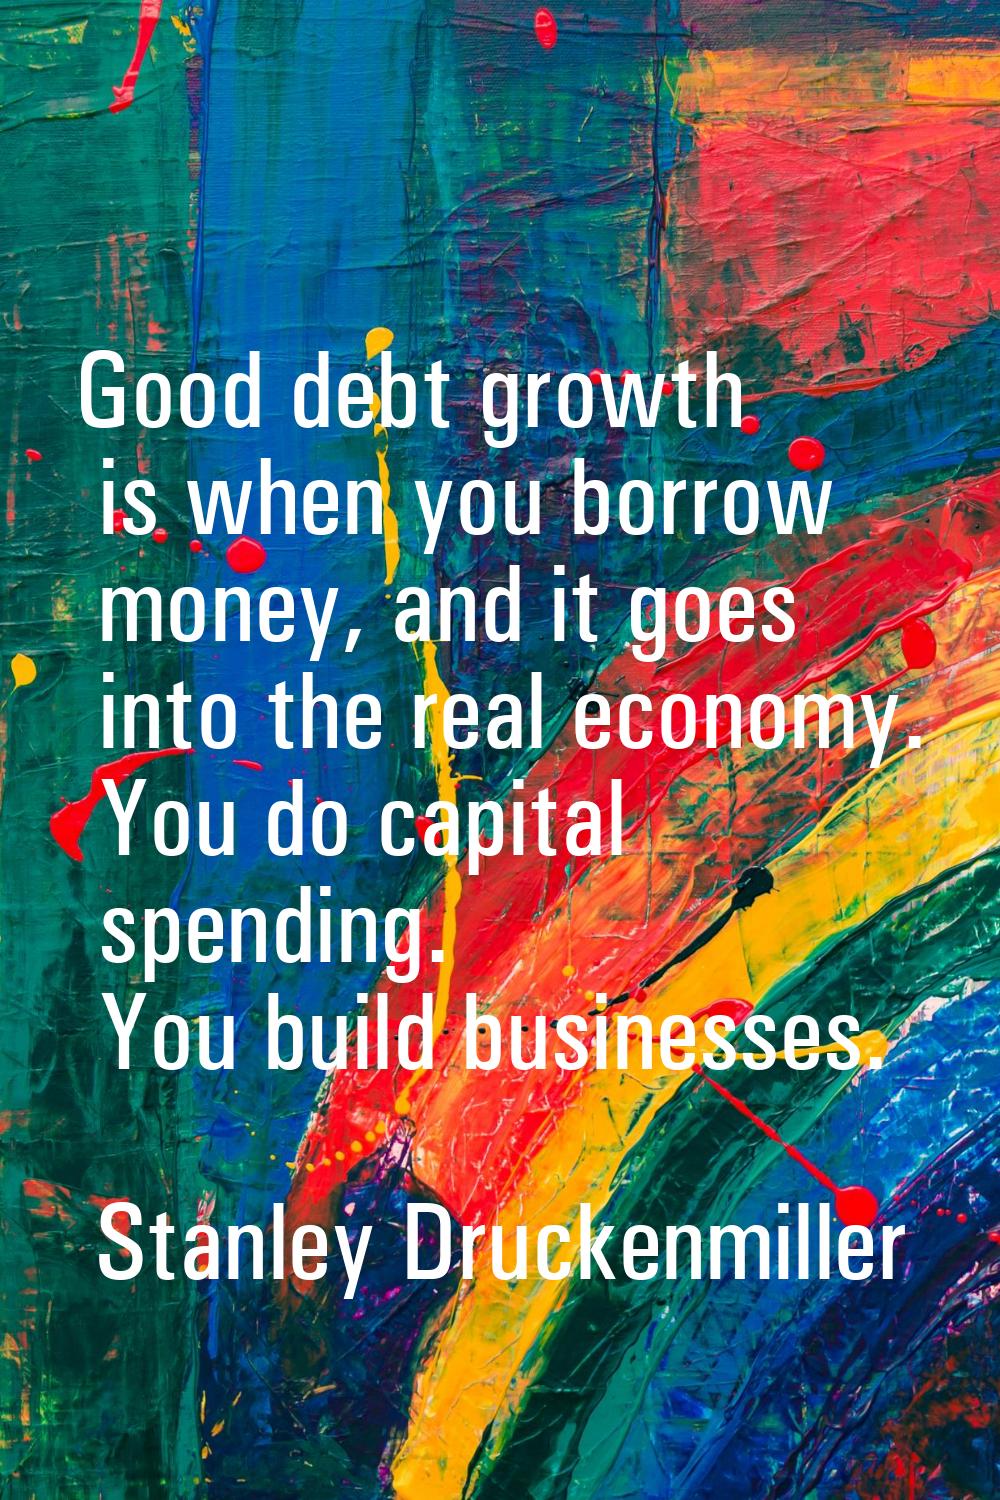 Good debt growth is when you borrow money, and it goes into the real economy. You do capital spendi